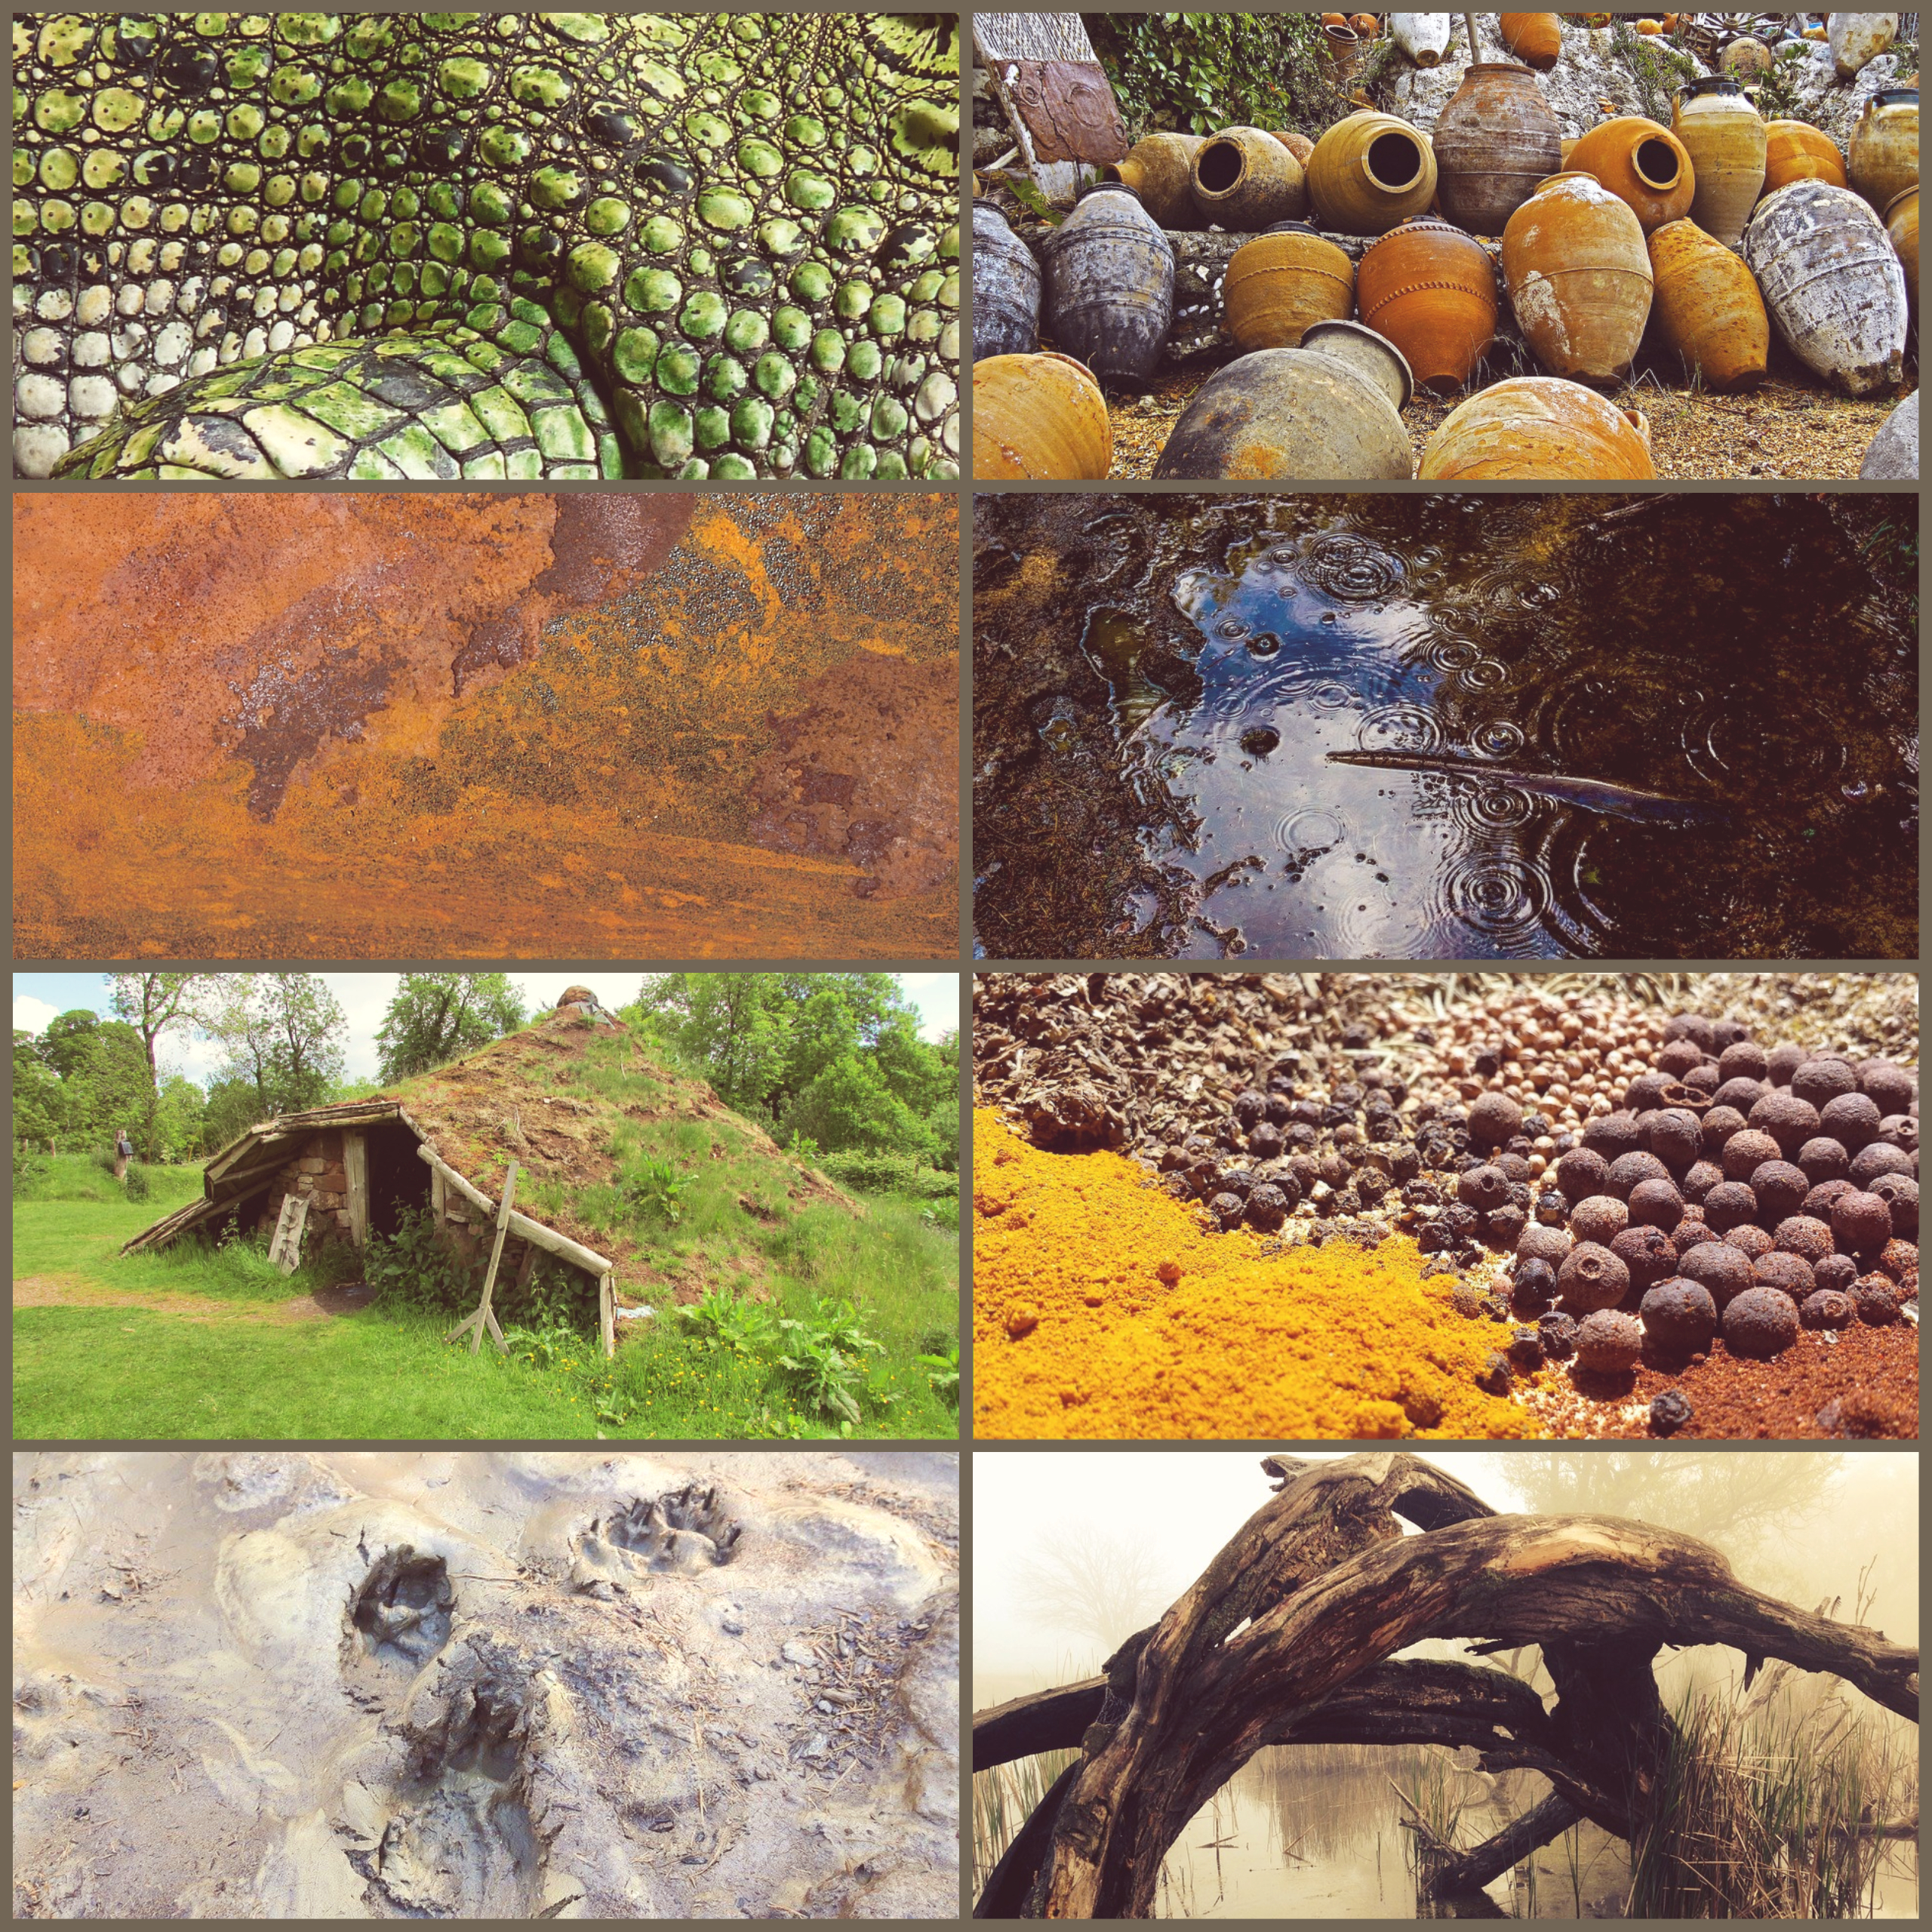 A collage of images relating to mud, pottery, rust, alligator scales, swamps, and spices